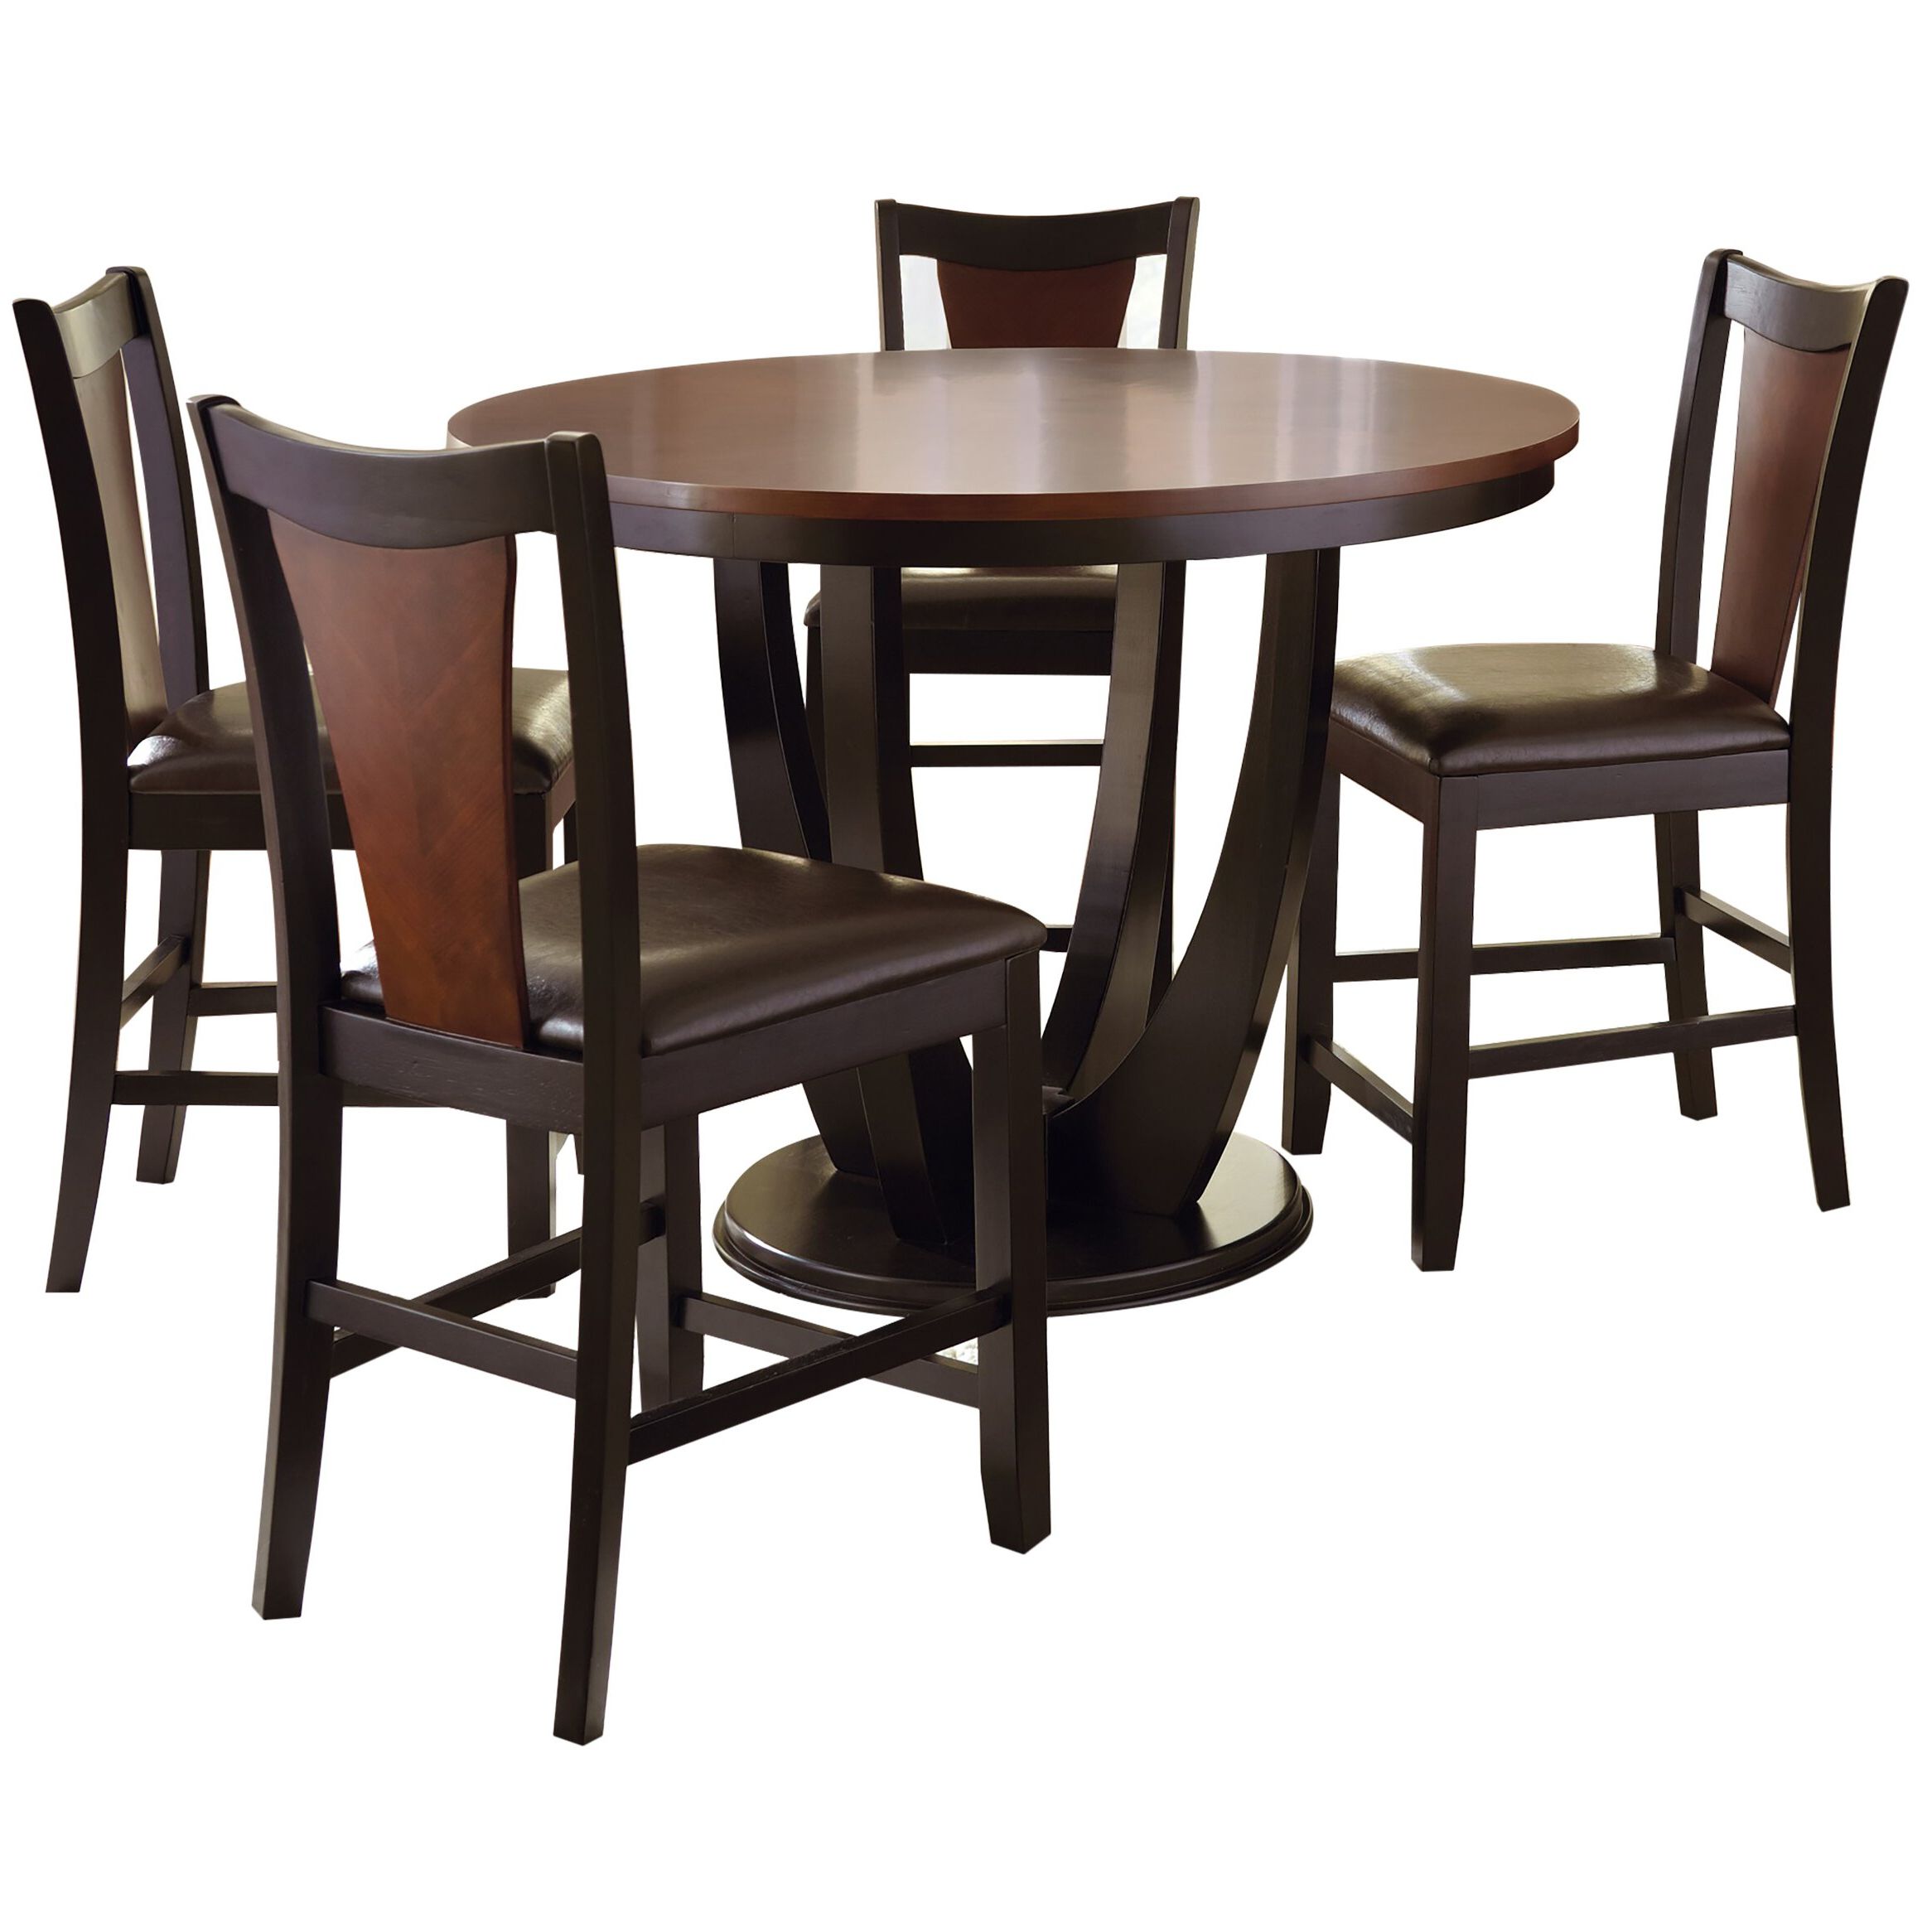 Wayfair With Regard To Widely Used Counter Height Pedestal Dining Tables (Gallery 12 of 20)